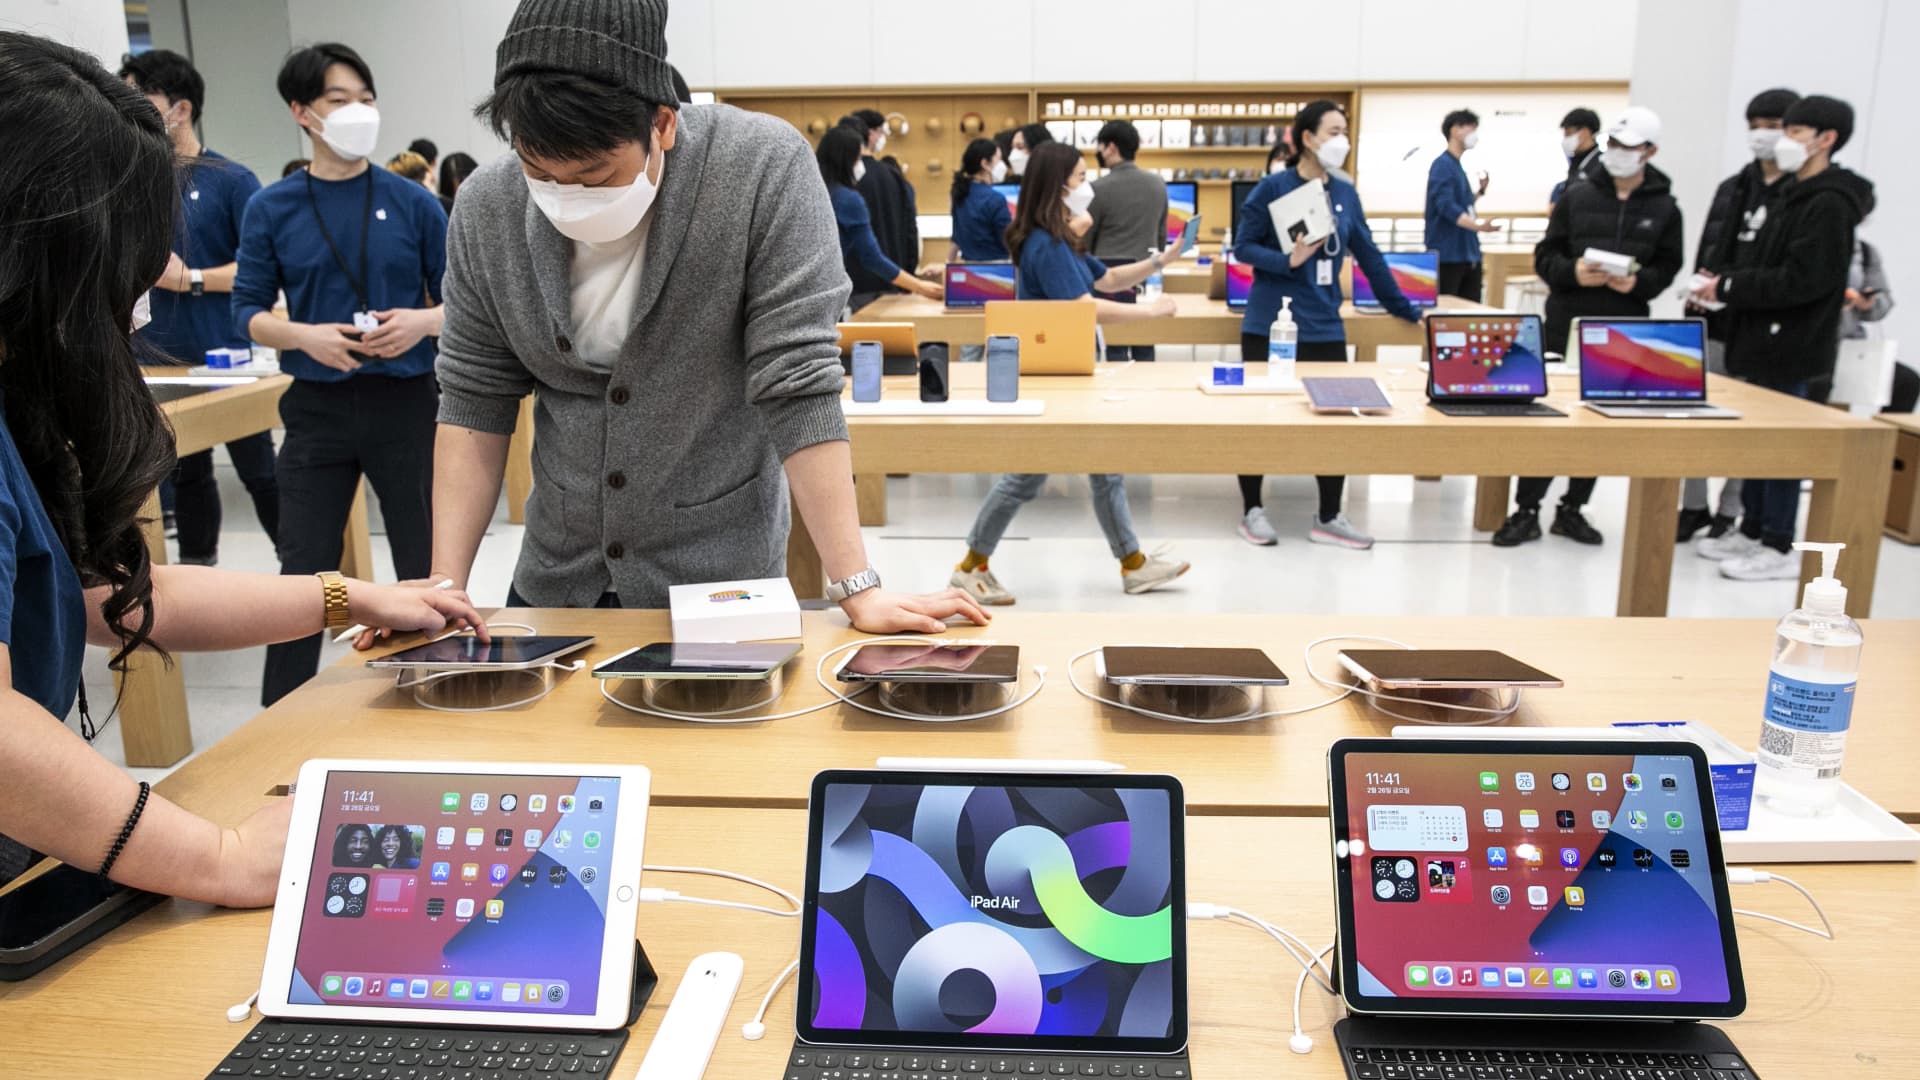 Various models of the Apple Inc. iPad at the company's Yeouido store during its opening in Seoul, South Korea, on Friday, Feb. 26, 2021.